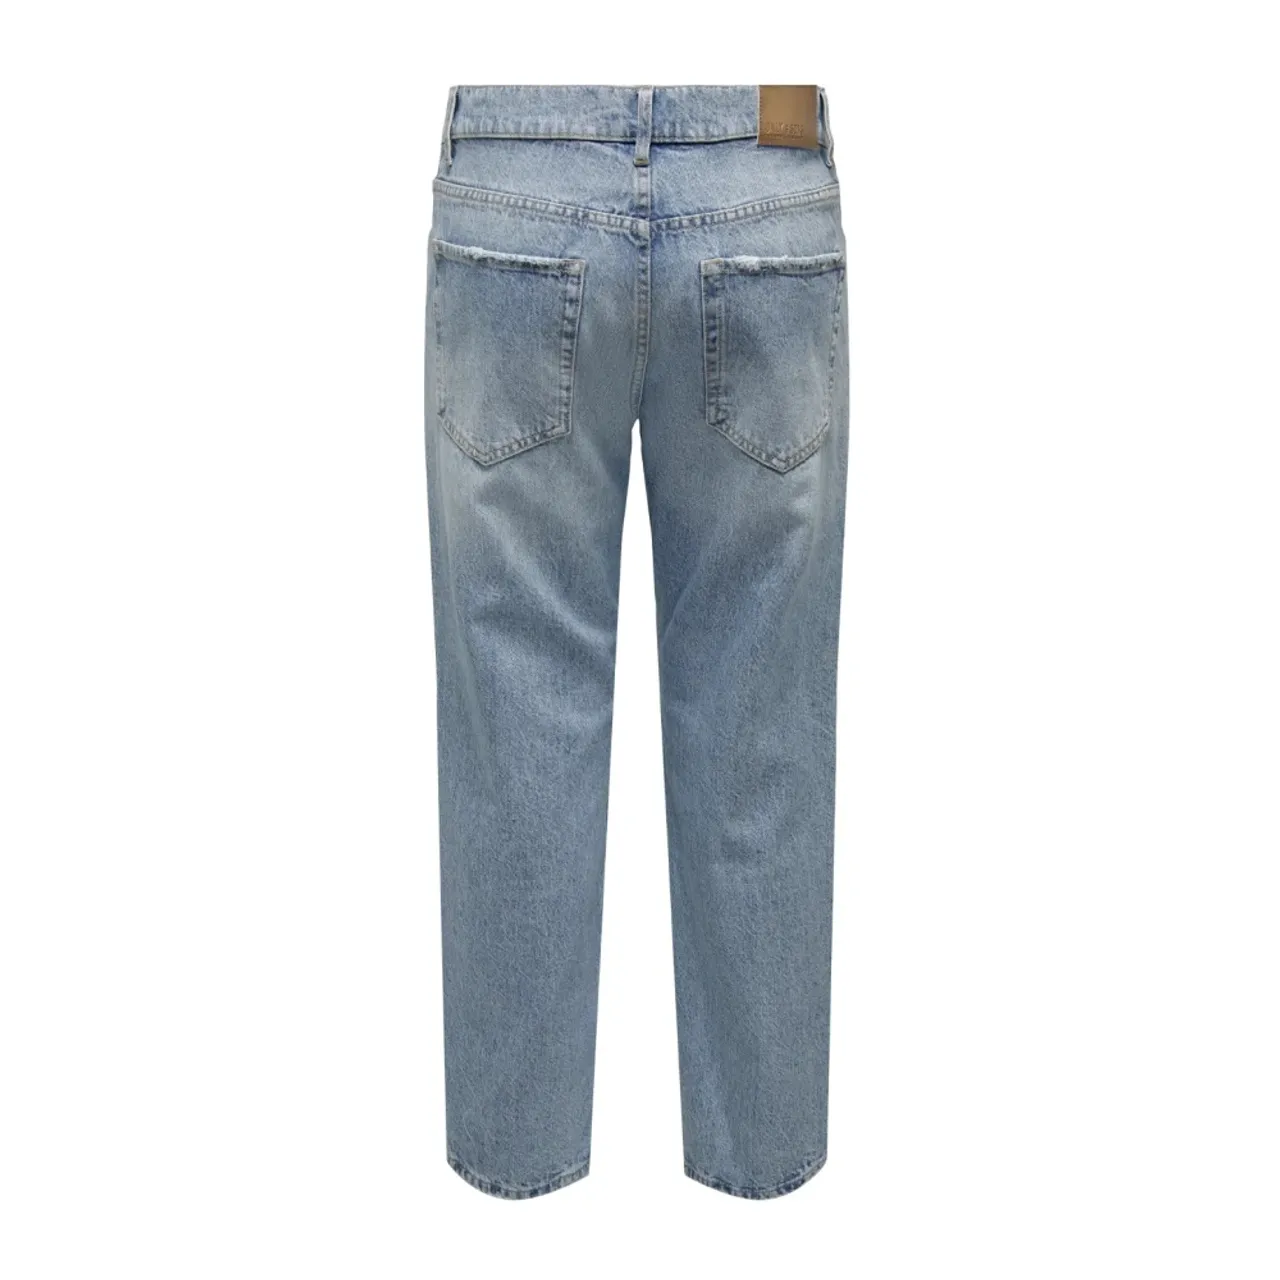 Only & Sons , Slim Fit Denim Jeans ,Blue male, Sizes: W34 L32, W29 L30, W30 L32, W28 L30, W32 L32, W28 L32, W31 L32, W32 L30, W30 L30, W33 L32, W31 L3